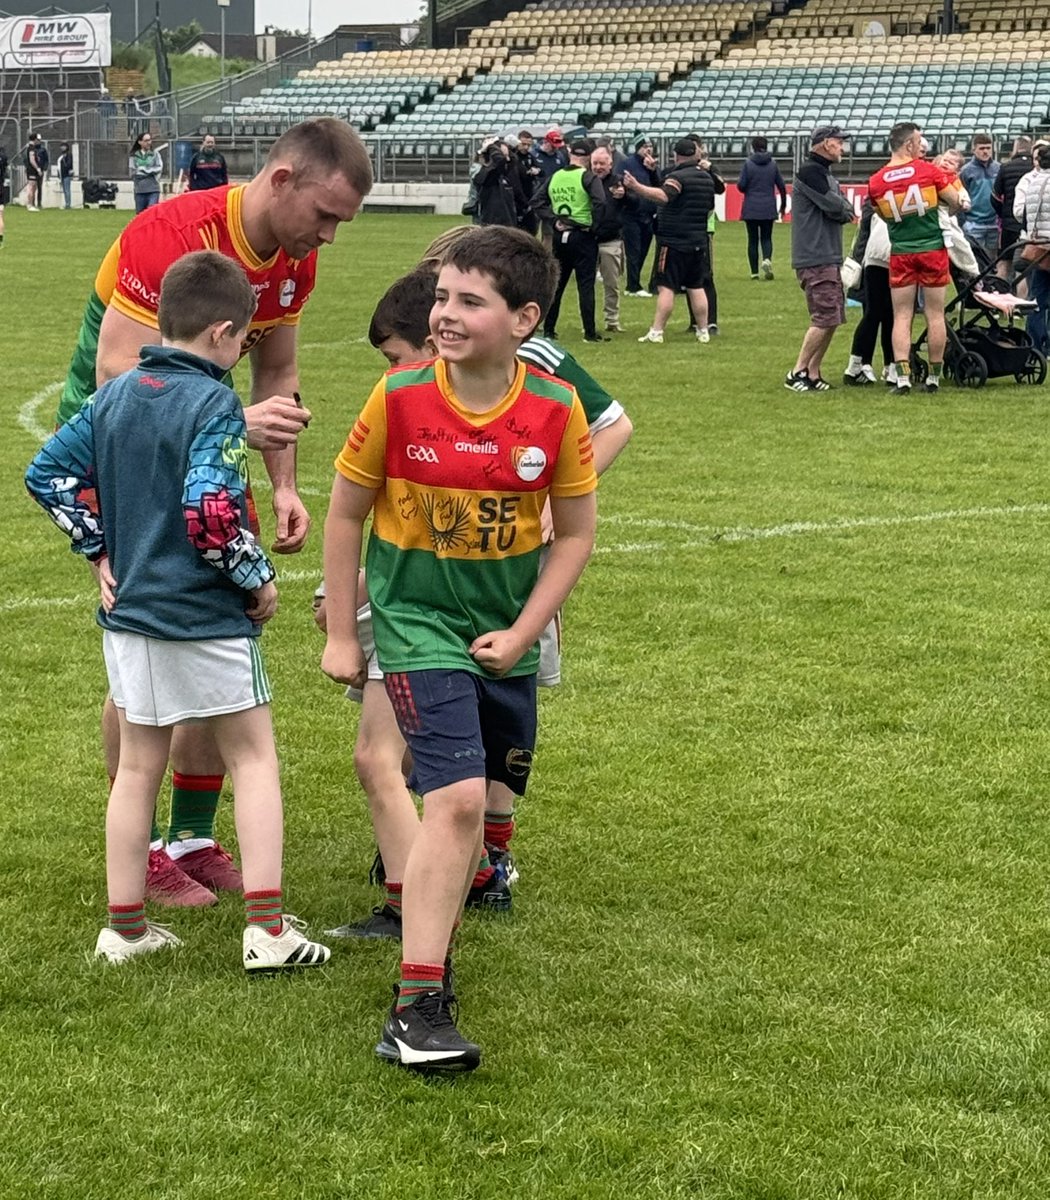 Mark Furey and the Carlow footballers took the time to put smiles on faces by signing autographs despite Carlow’s narrow loss to Fermanagh at the weekend. 

Great vibes around the county at the minute, long may it last 🙏🇬🇳